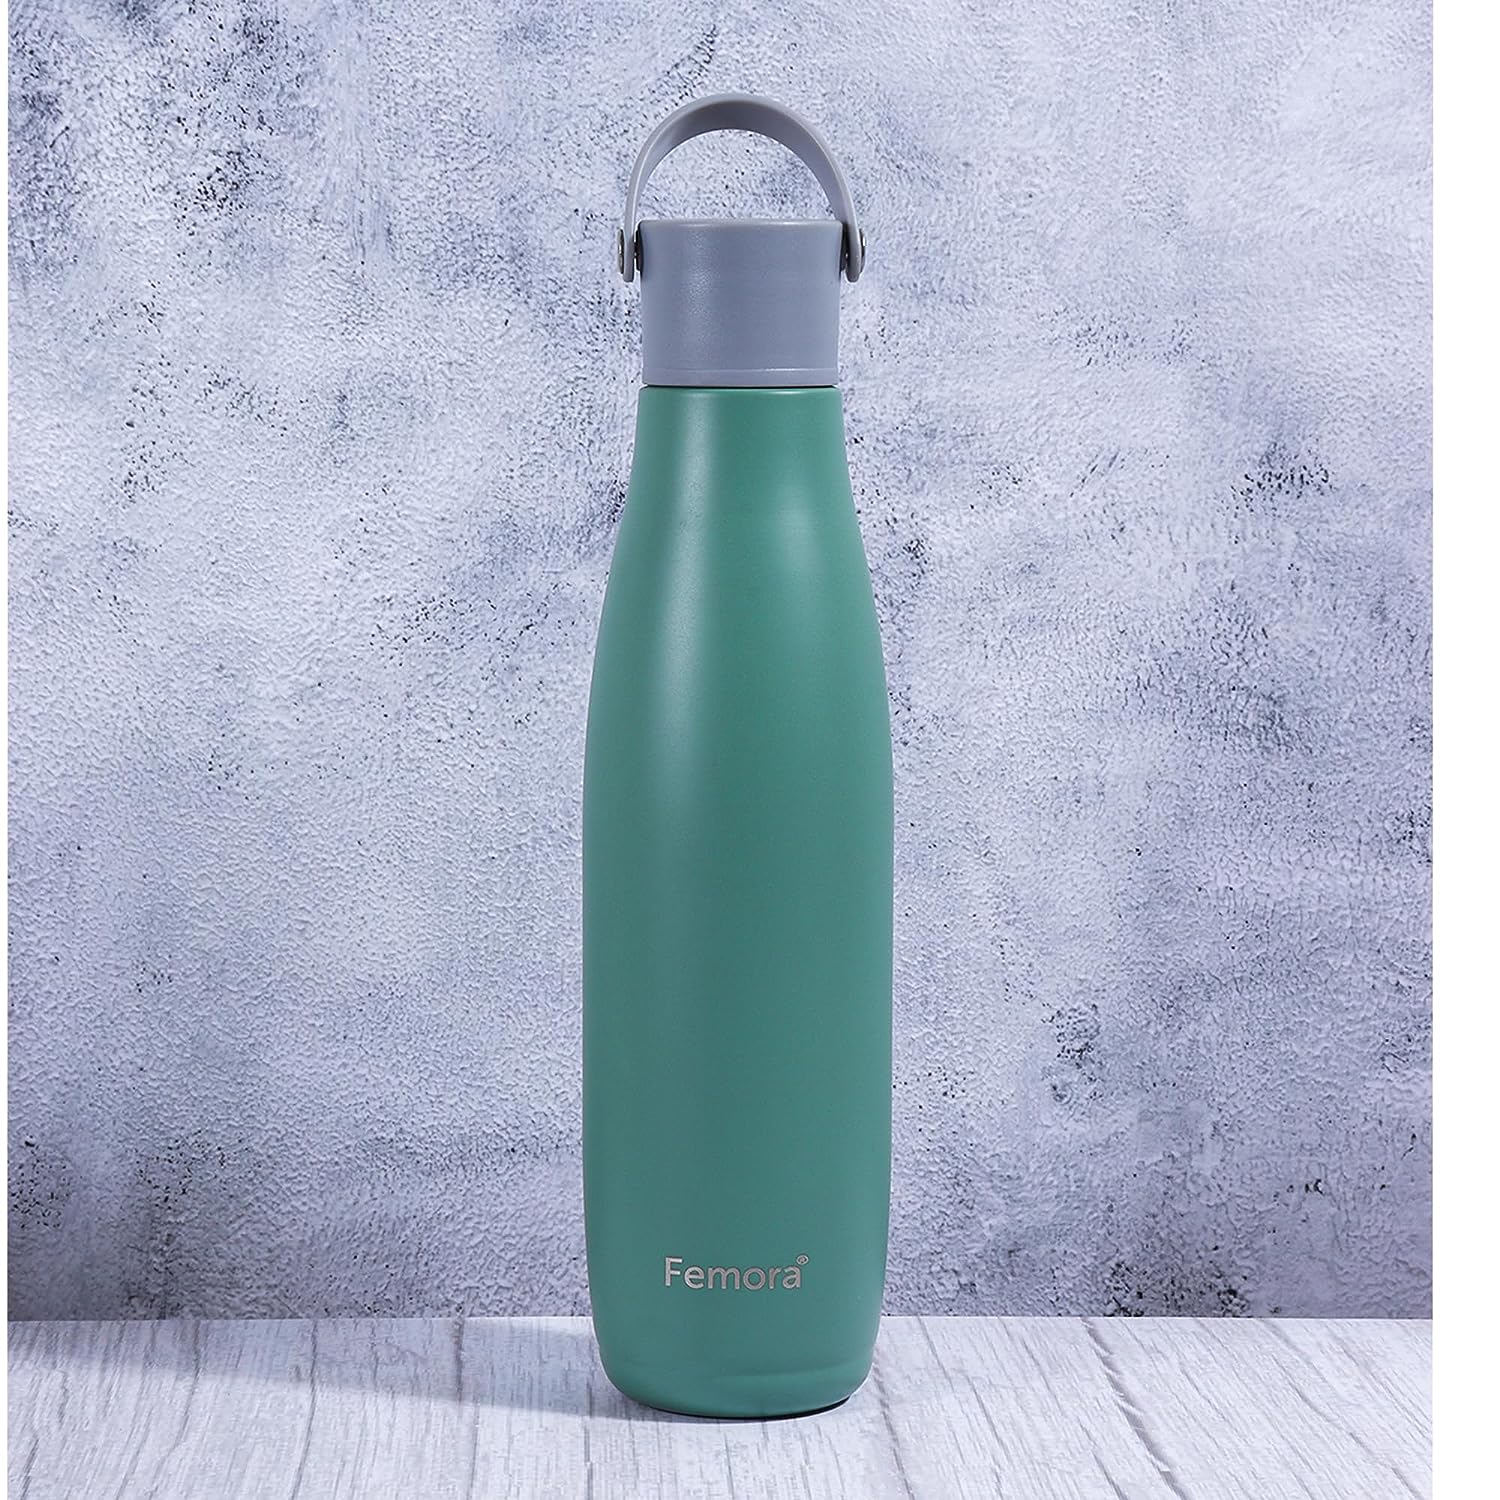 Femora Stainless Steel PureQuench Lifestyle Vessel Vacuum Insulated Flask Water Bottle, 700 ML, Jet Green